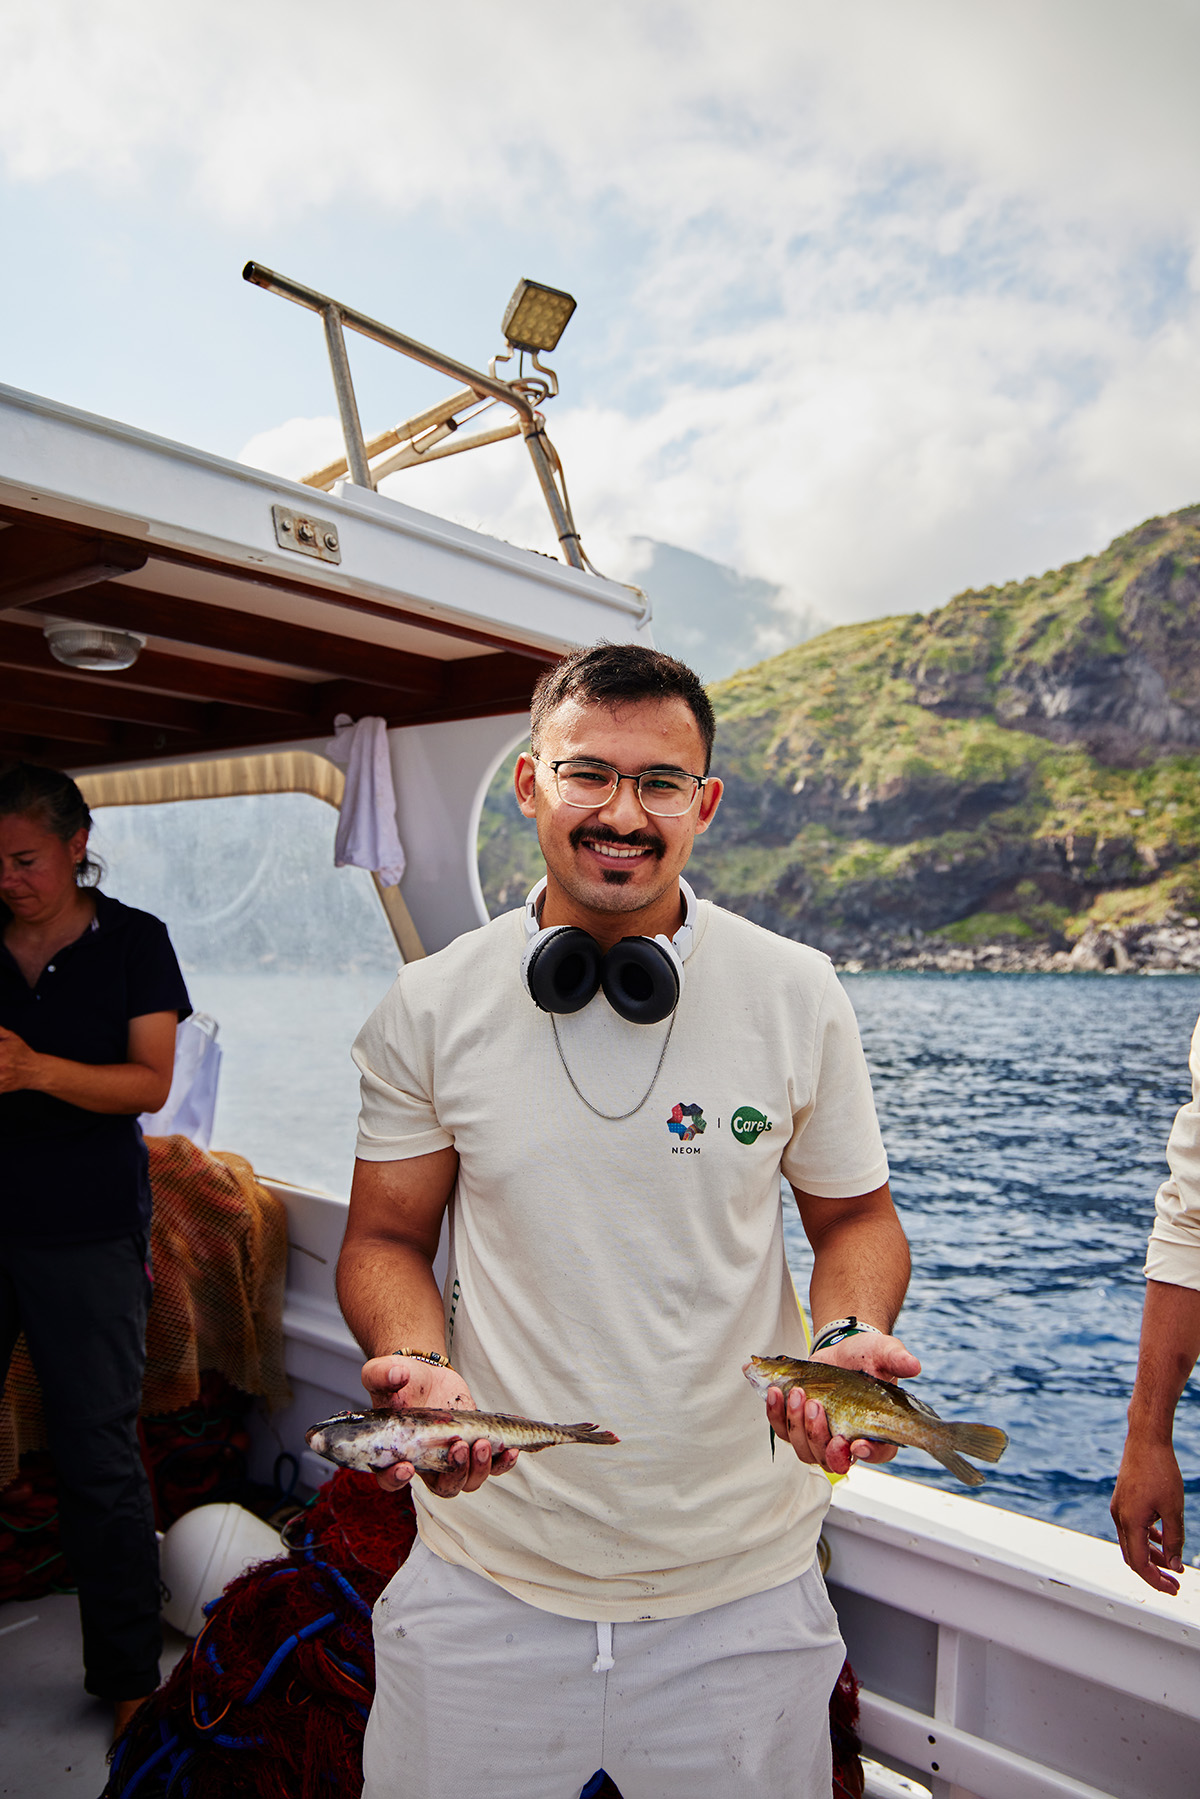 The Camp teaches culinary techniques that will help NEOM develop sustainable gastronomy